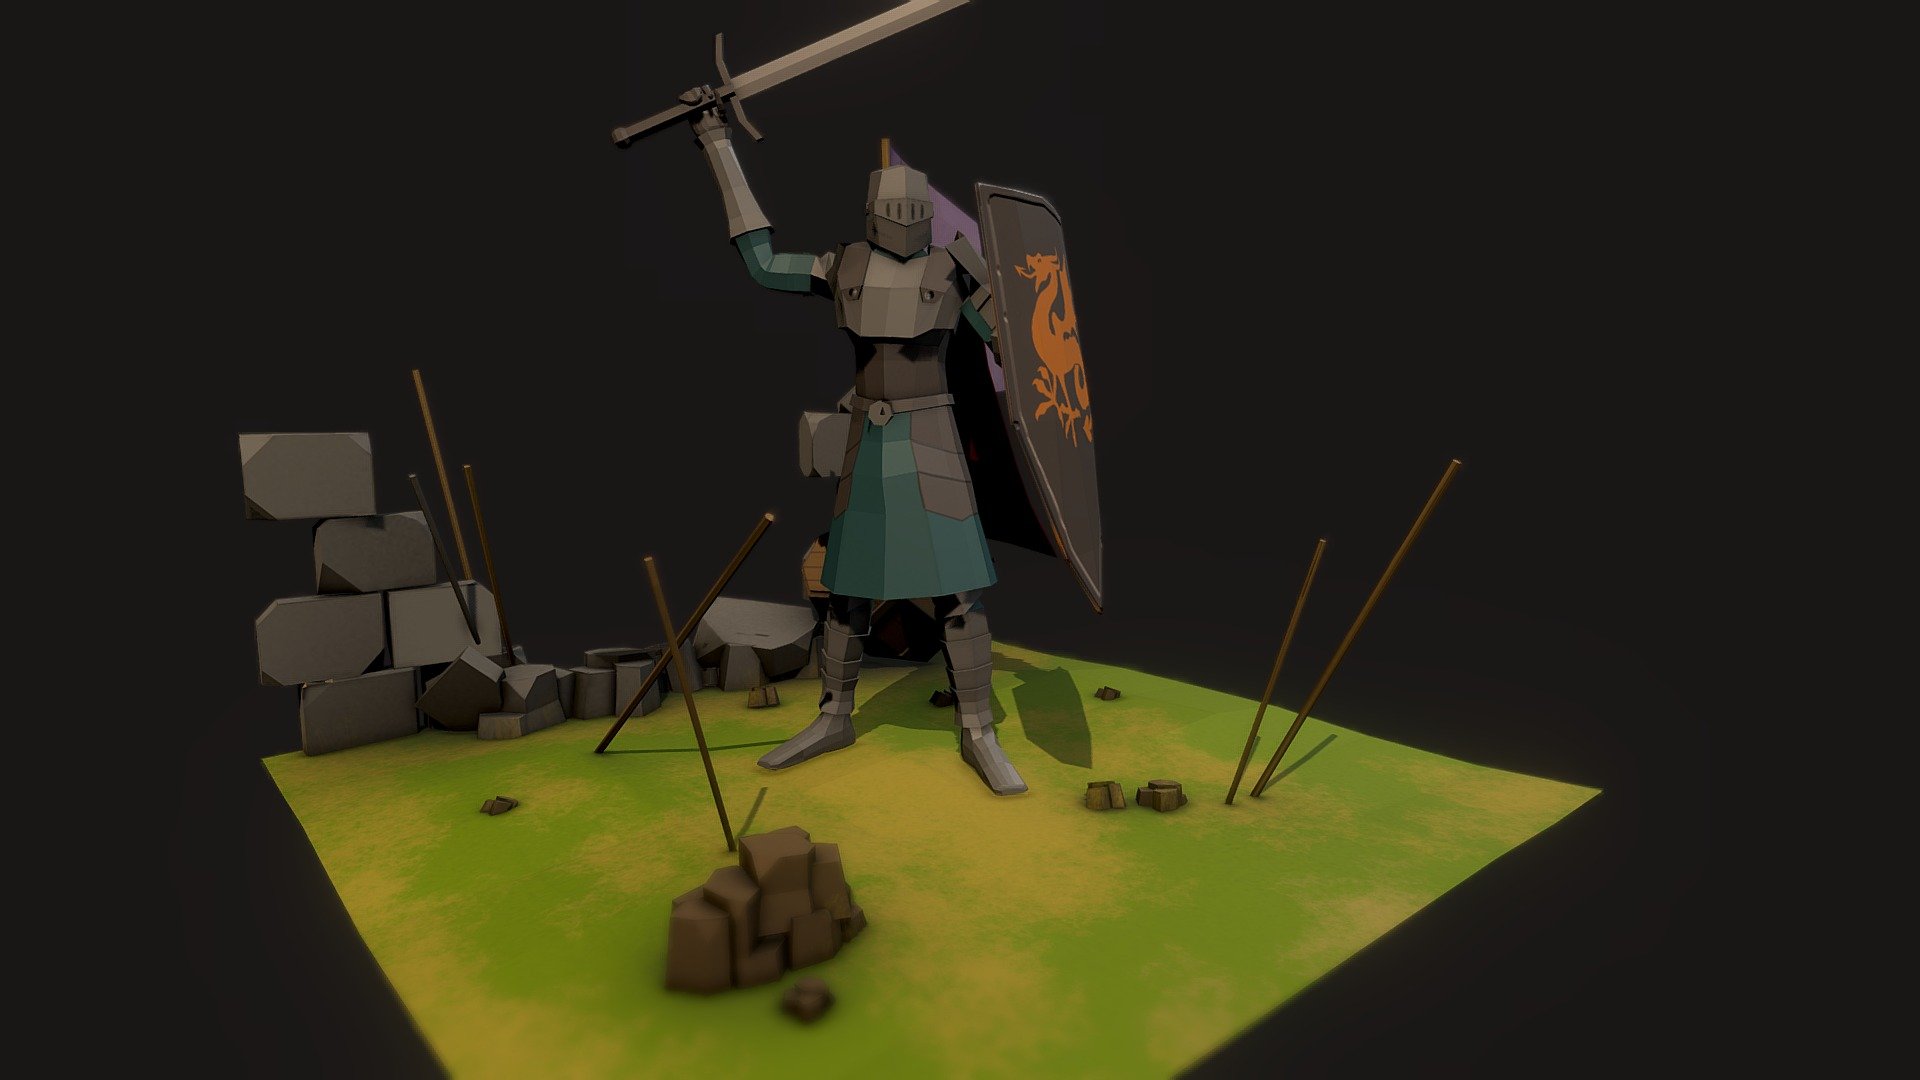 Great knight model for rpg and dungeon crawling games.

Additional package includes:
-Textures Knight 1024 pbr
-Textures Environment 2048 pbr
-T pose mesh FBX format
-Rigged mesh FBX format
-Blender 2.91 File - Low Poly Knight - Download Free 3D model by Rakshaan 3d model